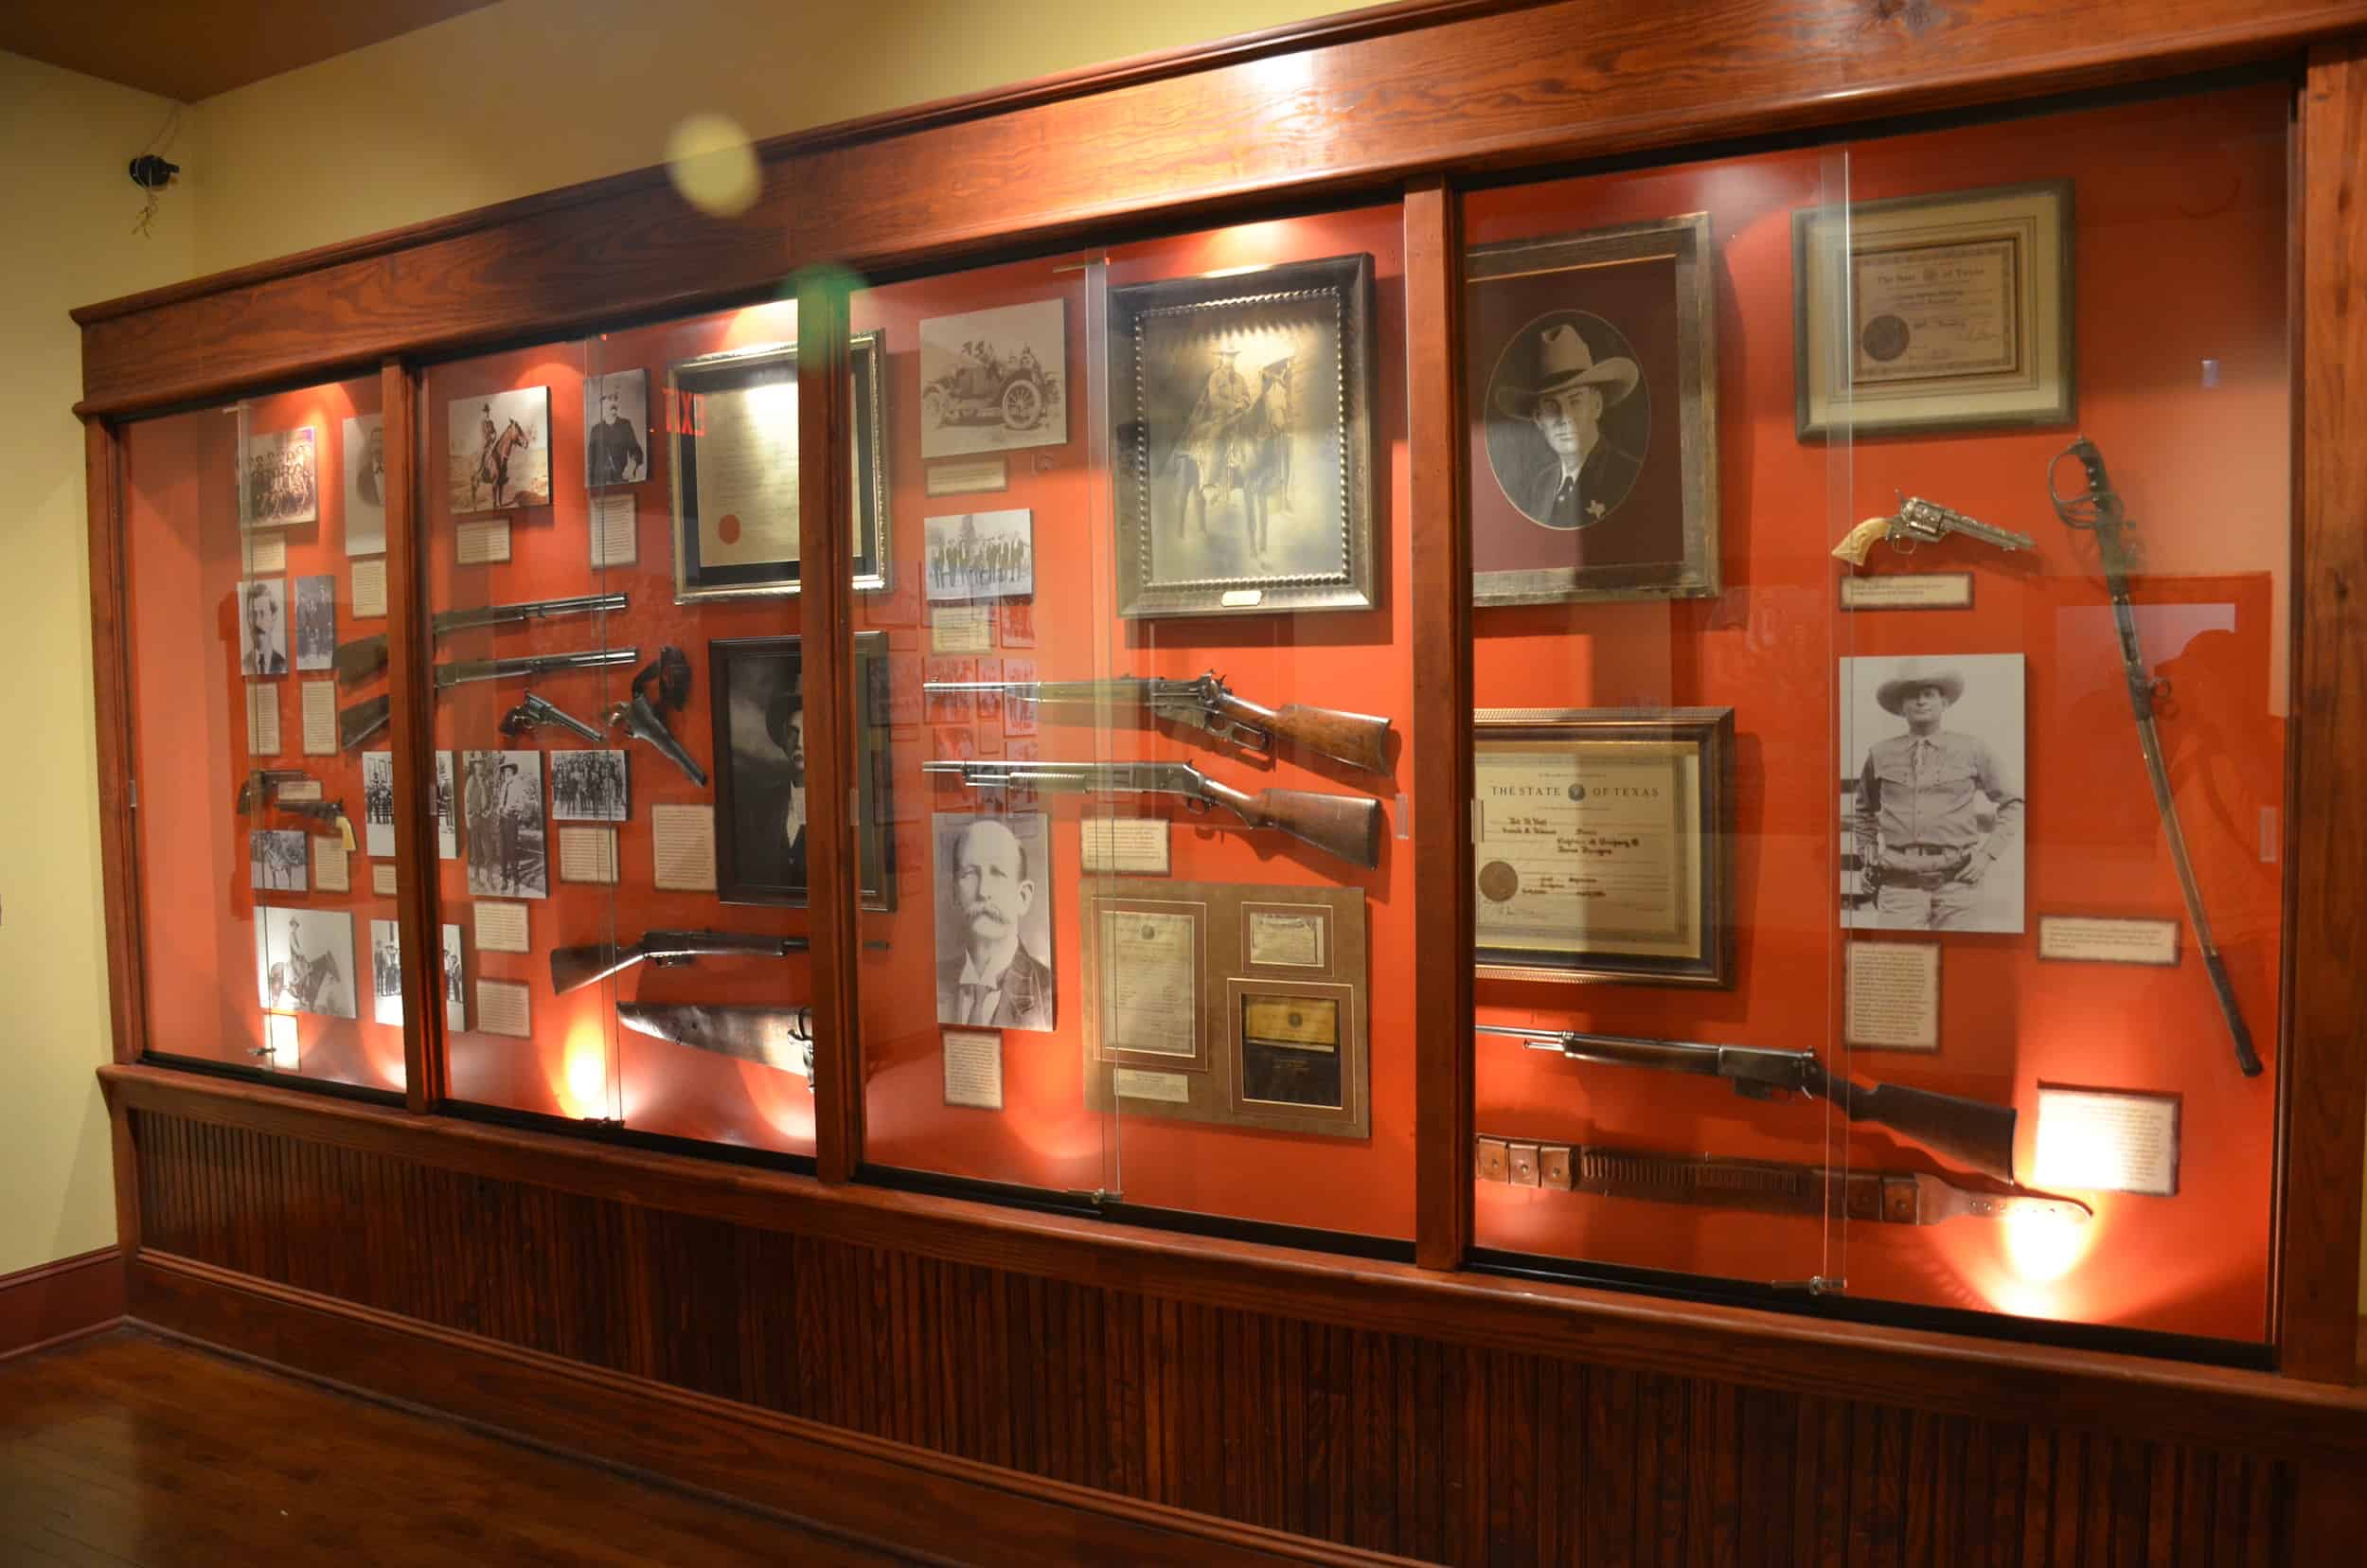 Artifacts at the Texas Ranger Museum